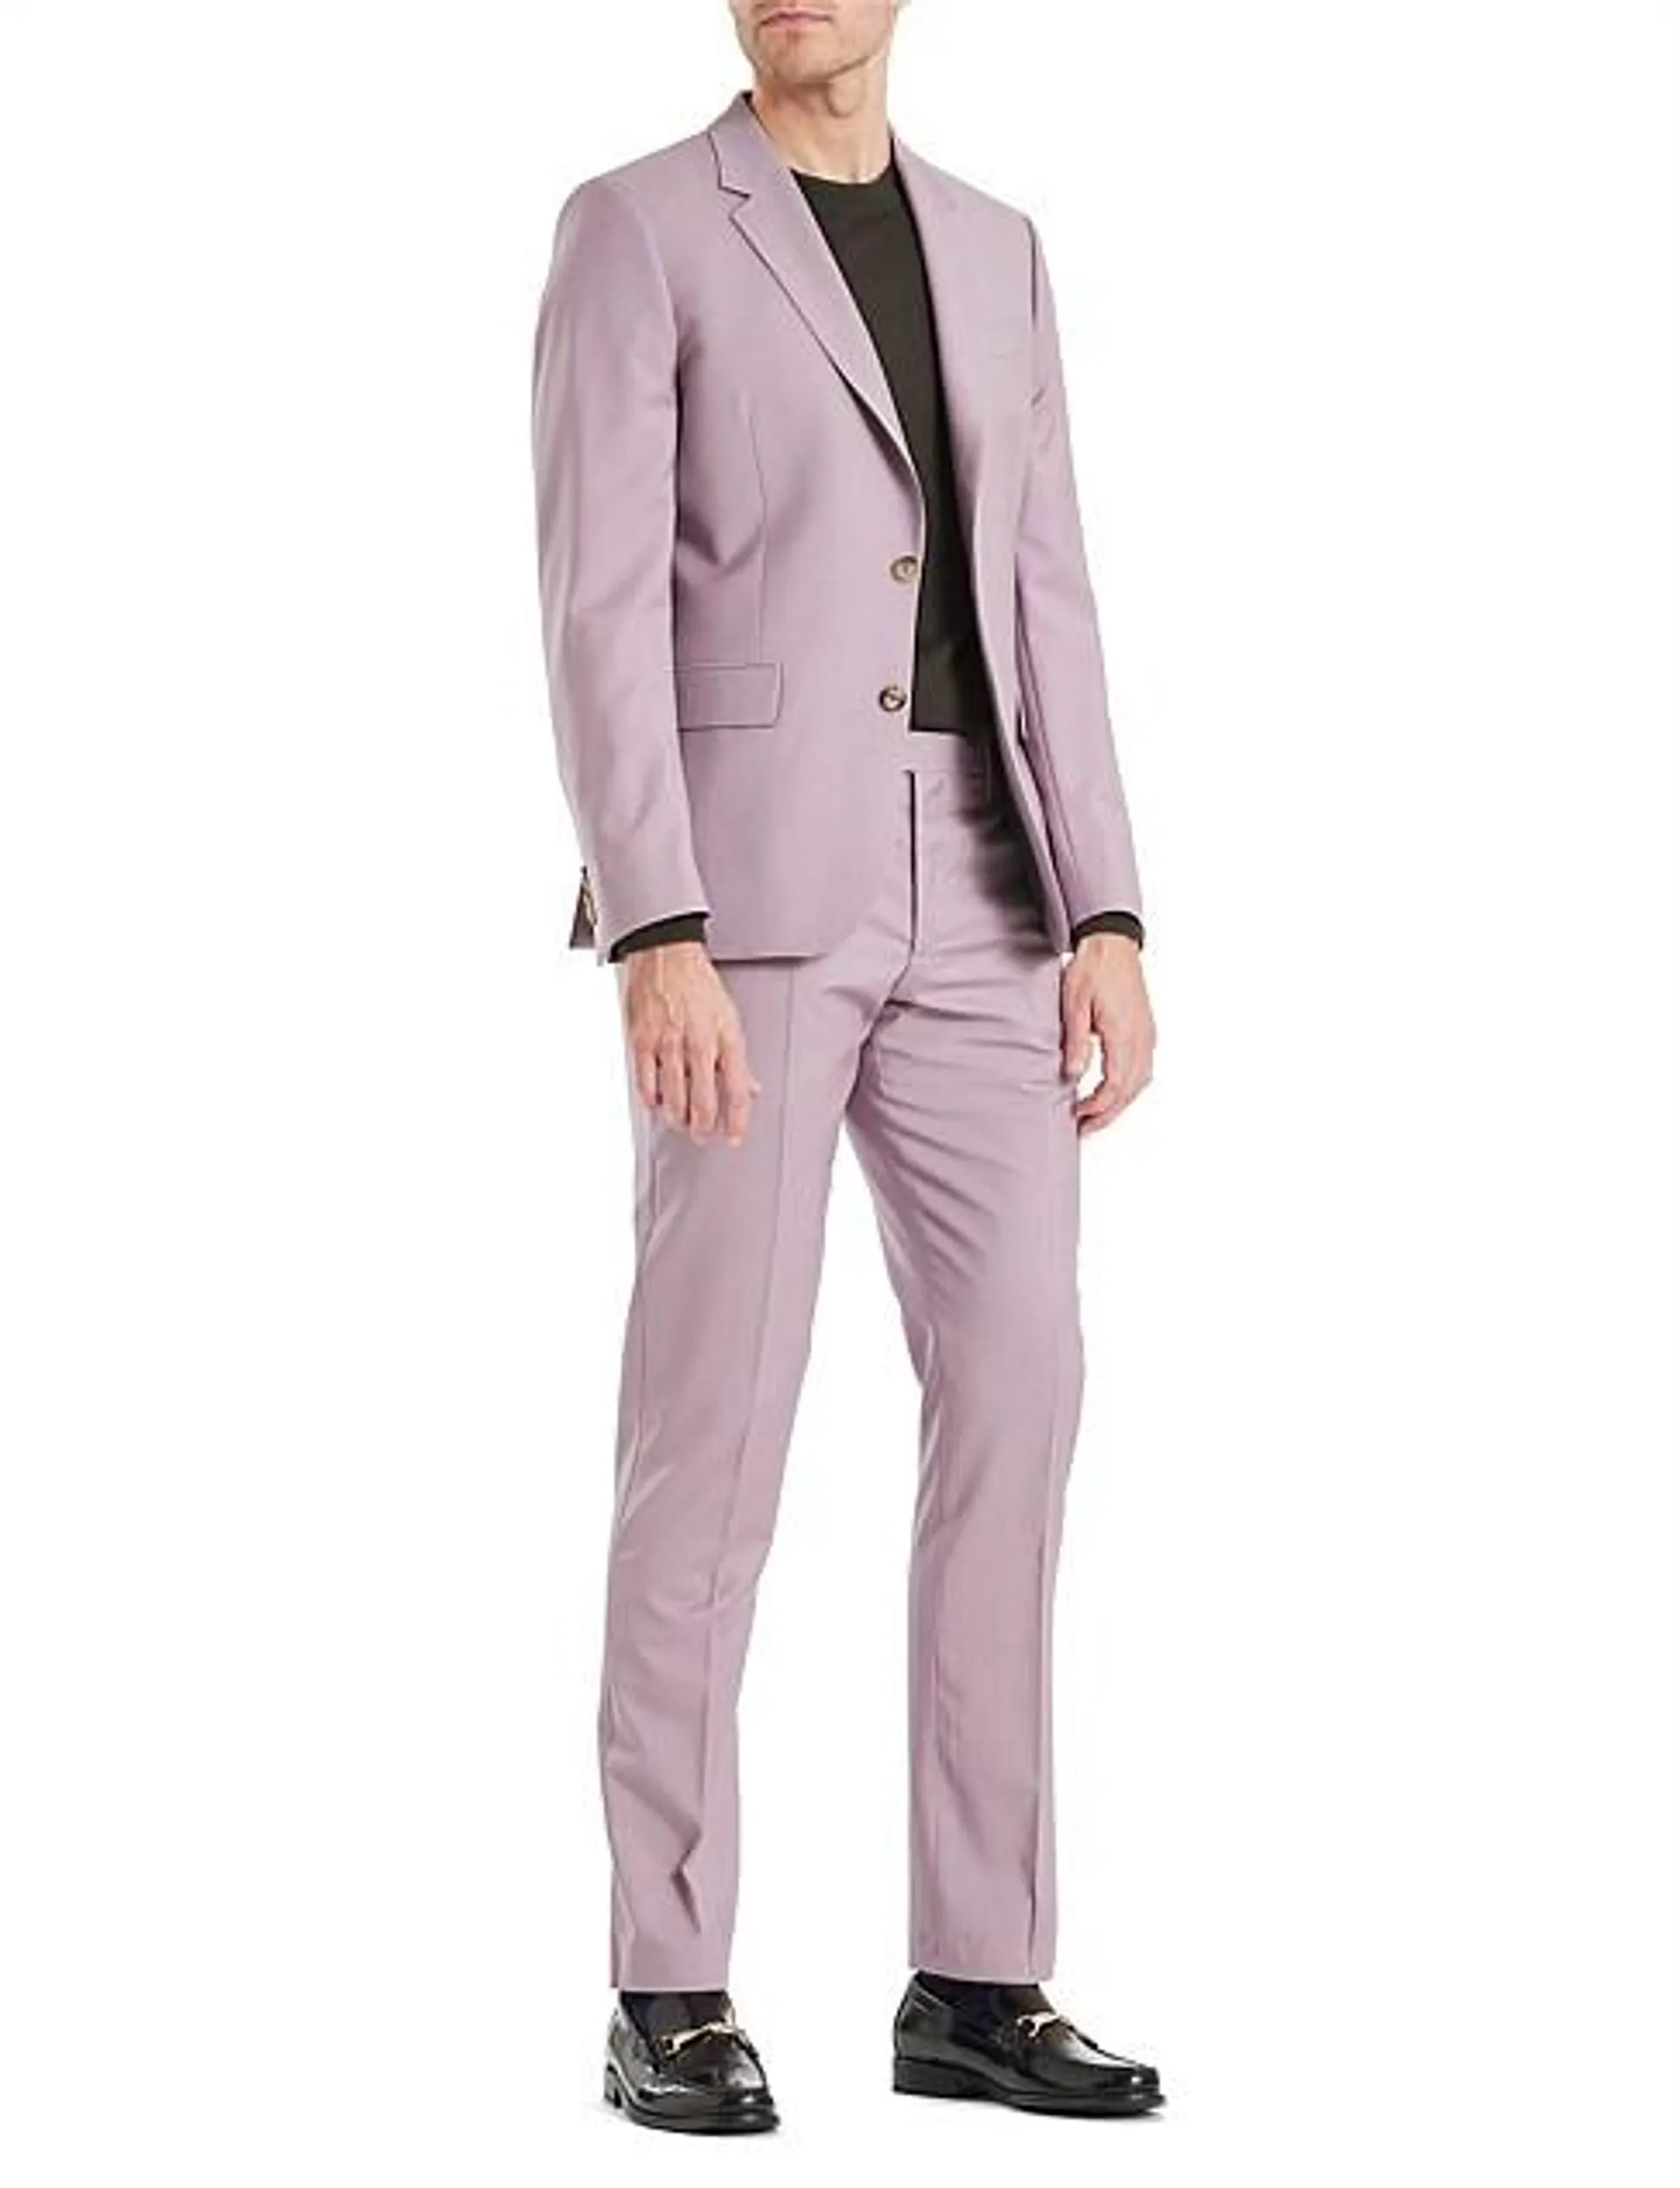 MENS TAILORED FIT TWO BUTTON SUIT